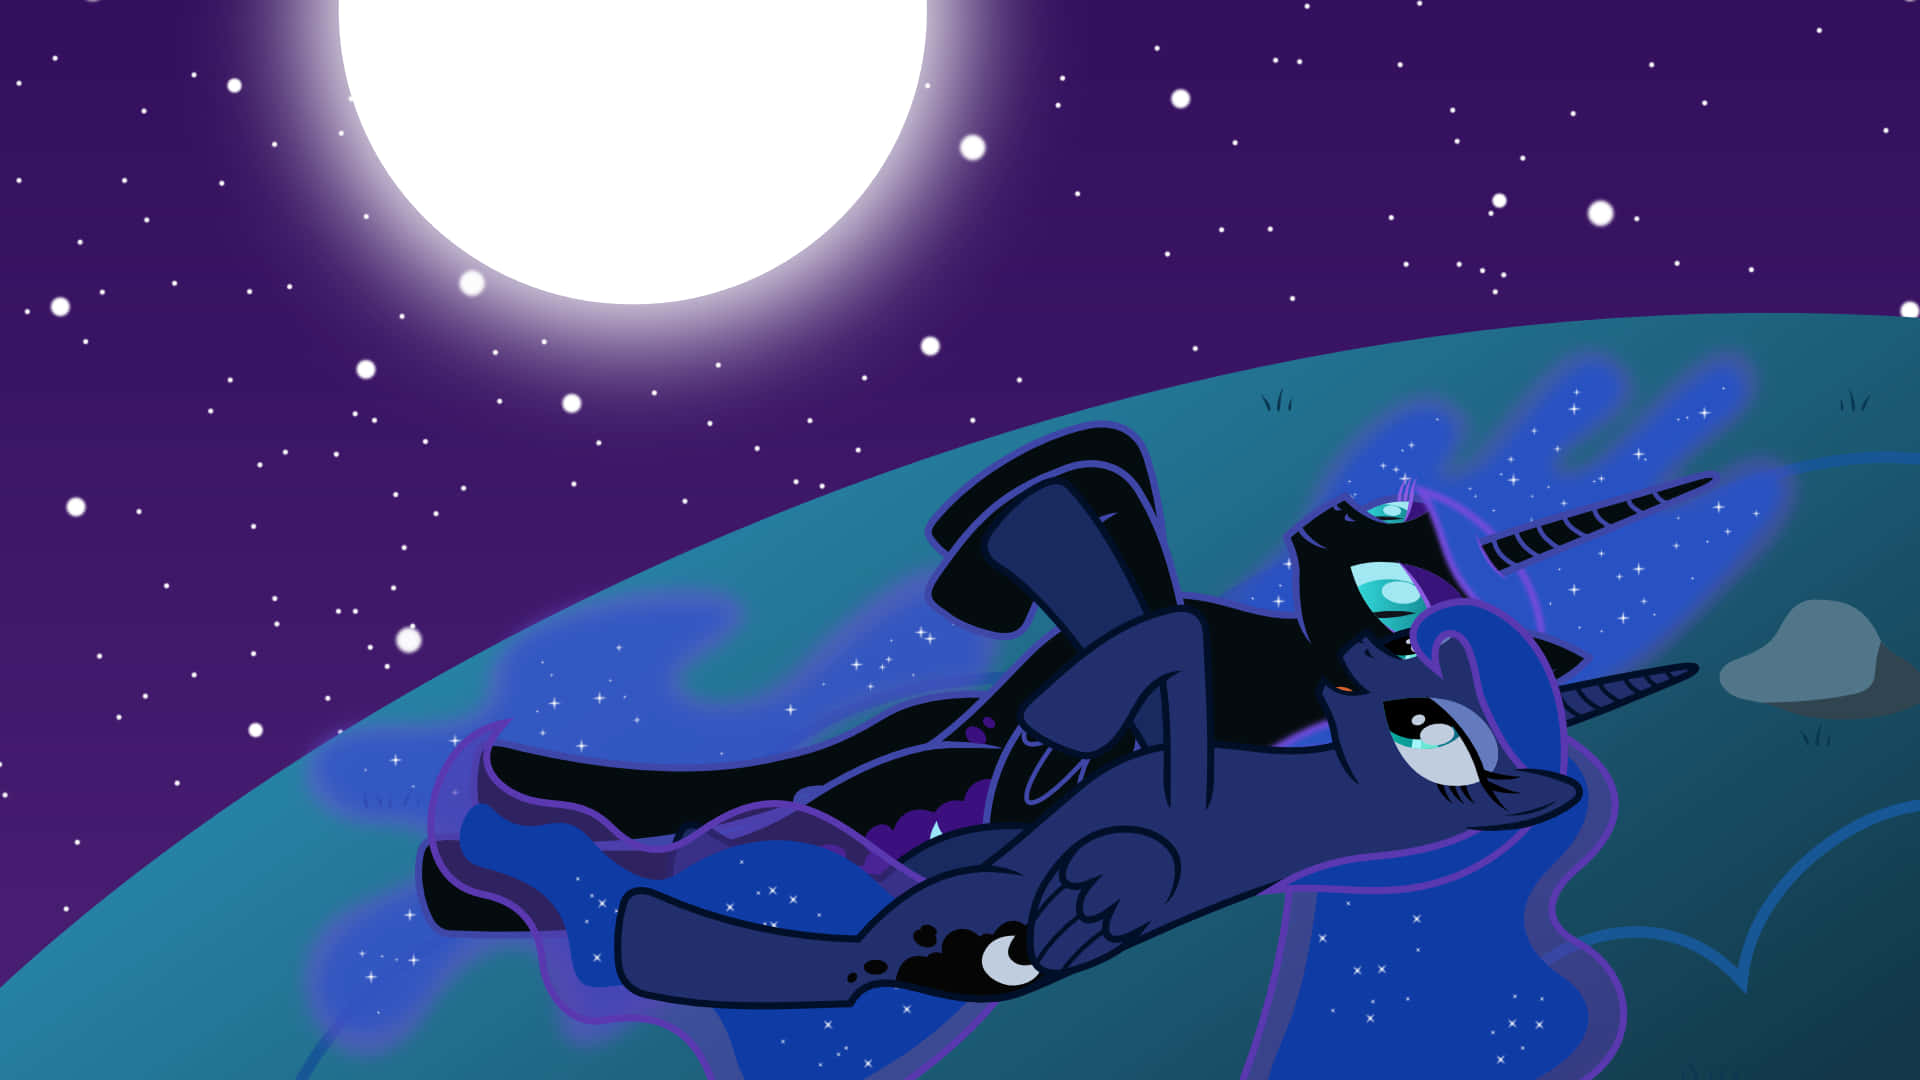 A Little Pony Is Floating In The Sky With A Moon Wallpaper